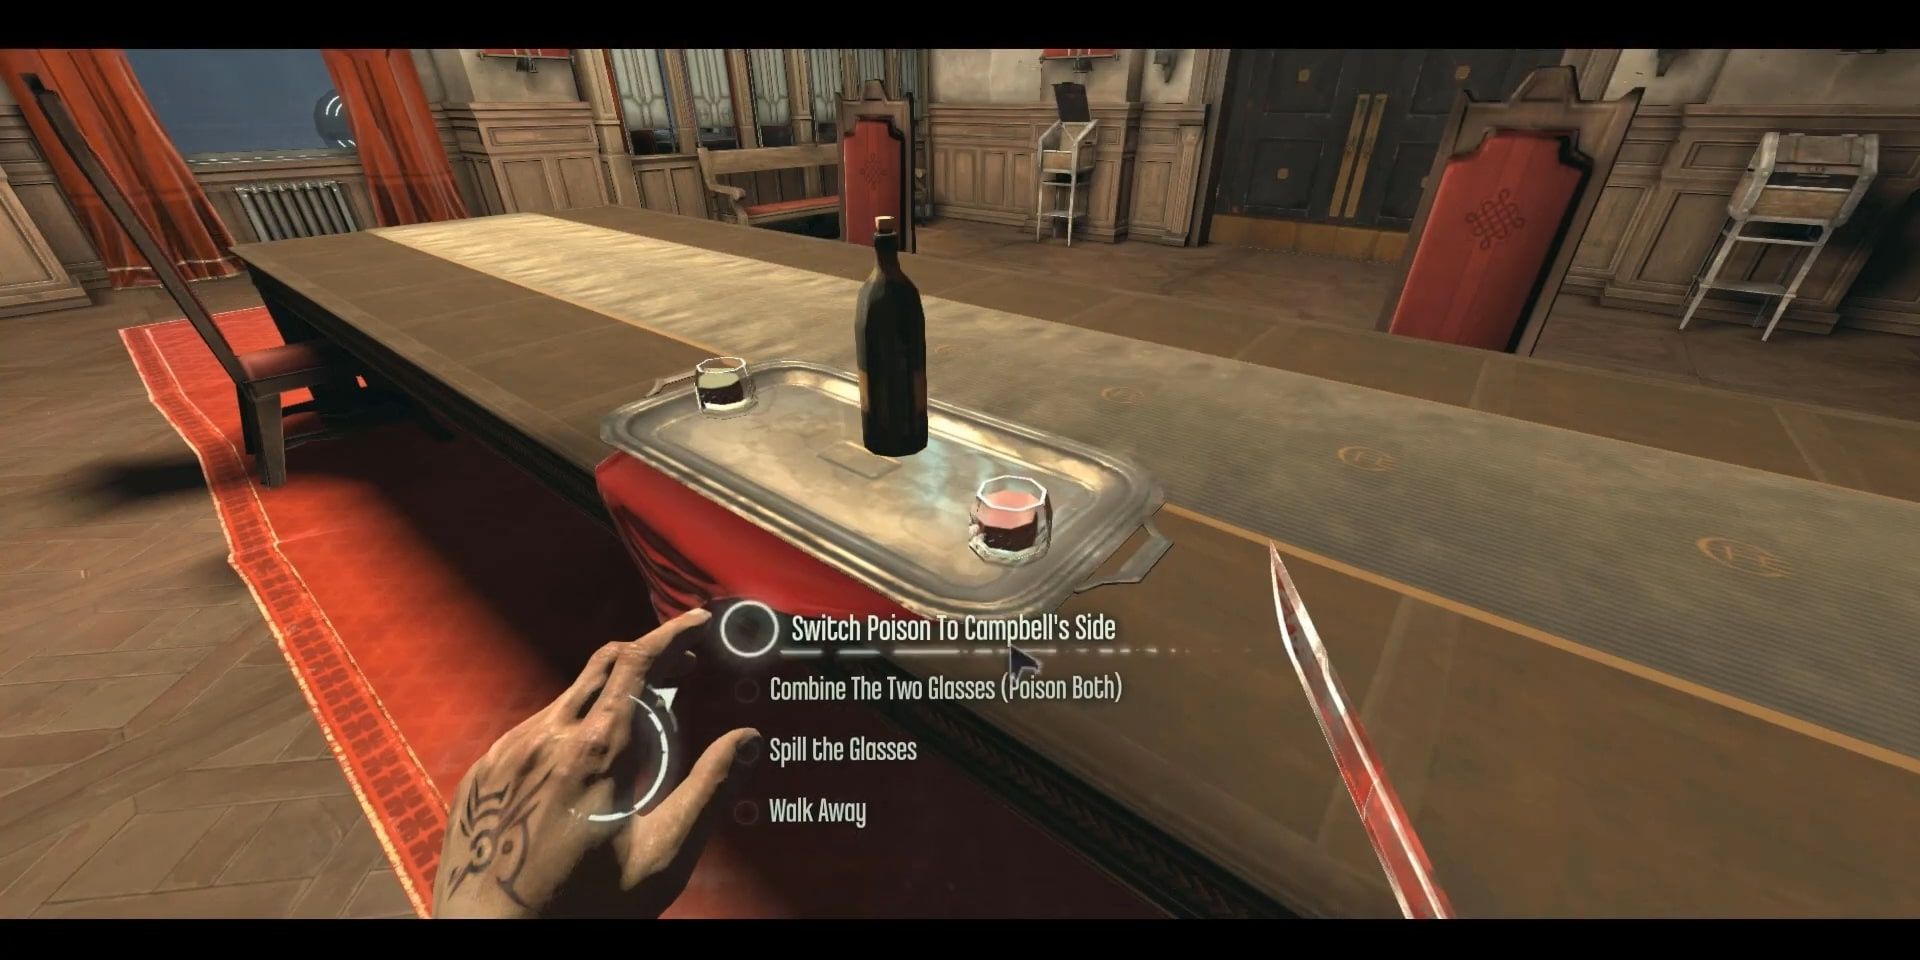 Dishonored Switching Campbell's Poison